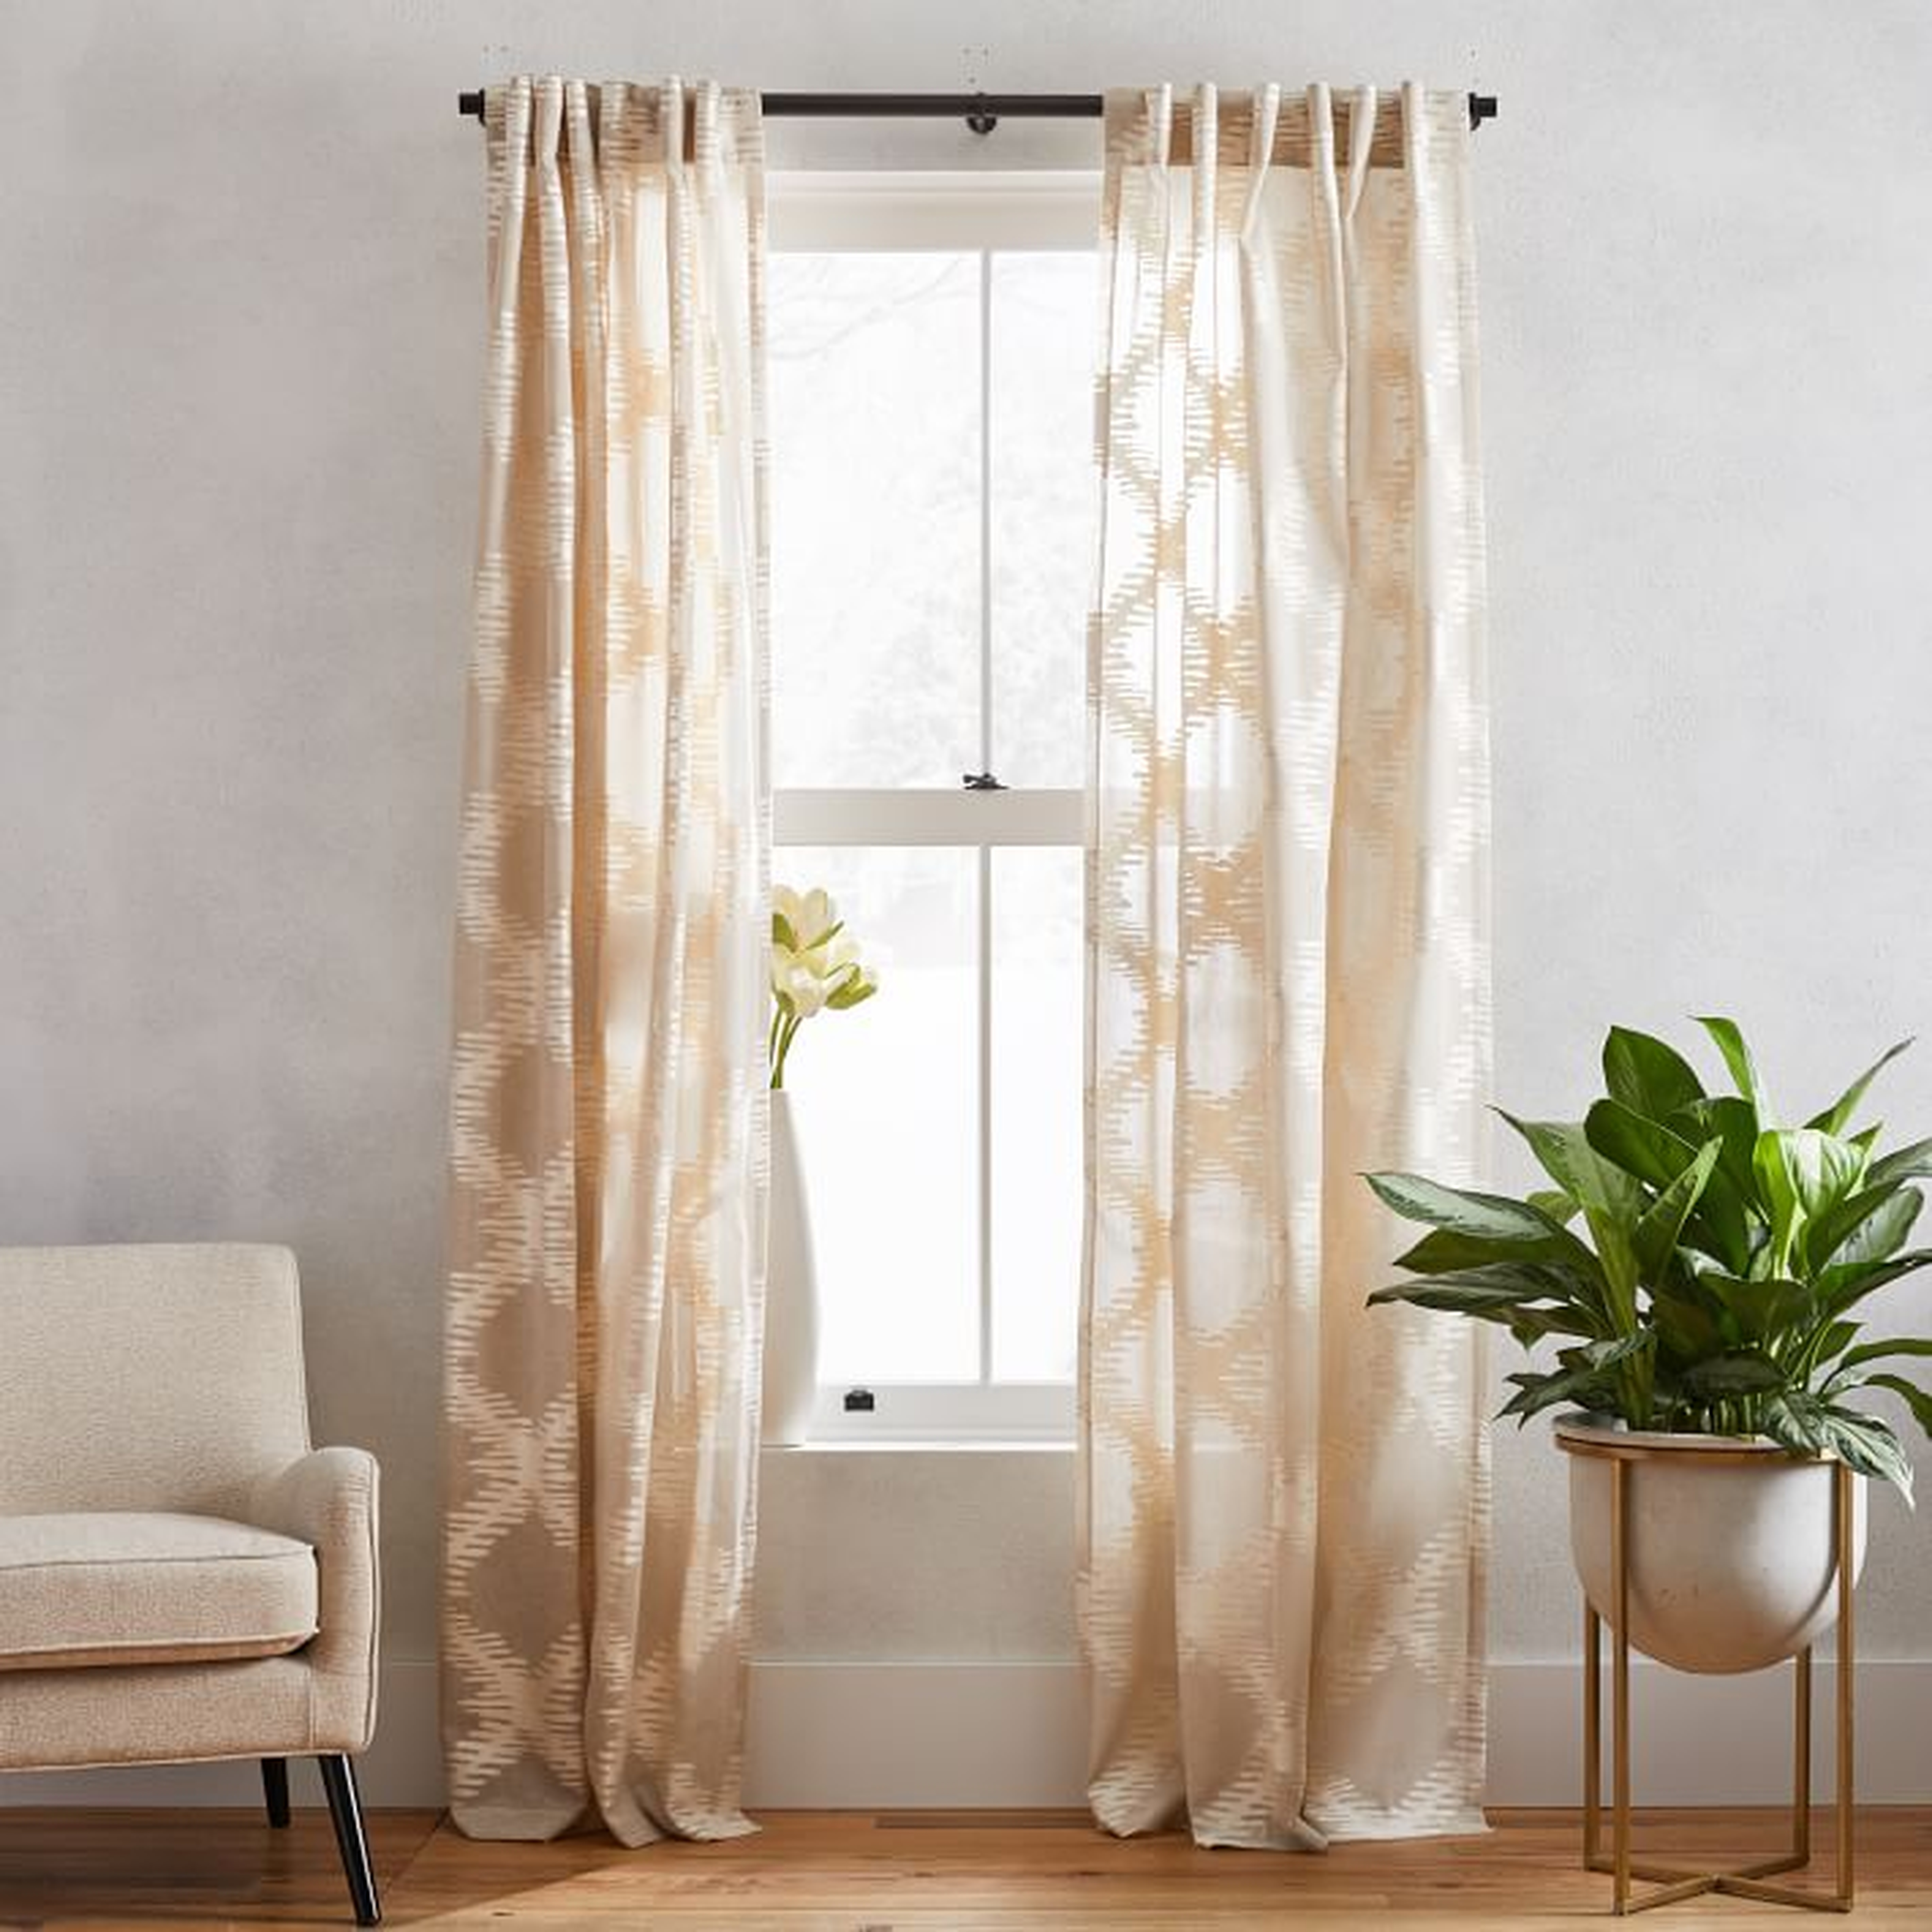 Trellis Ogee Clipped Jacquard Curtain,Belgian Flax/Ivory, 48"x96" - West Elm